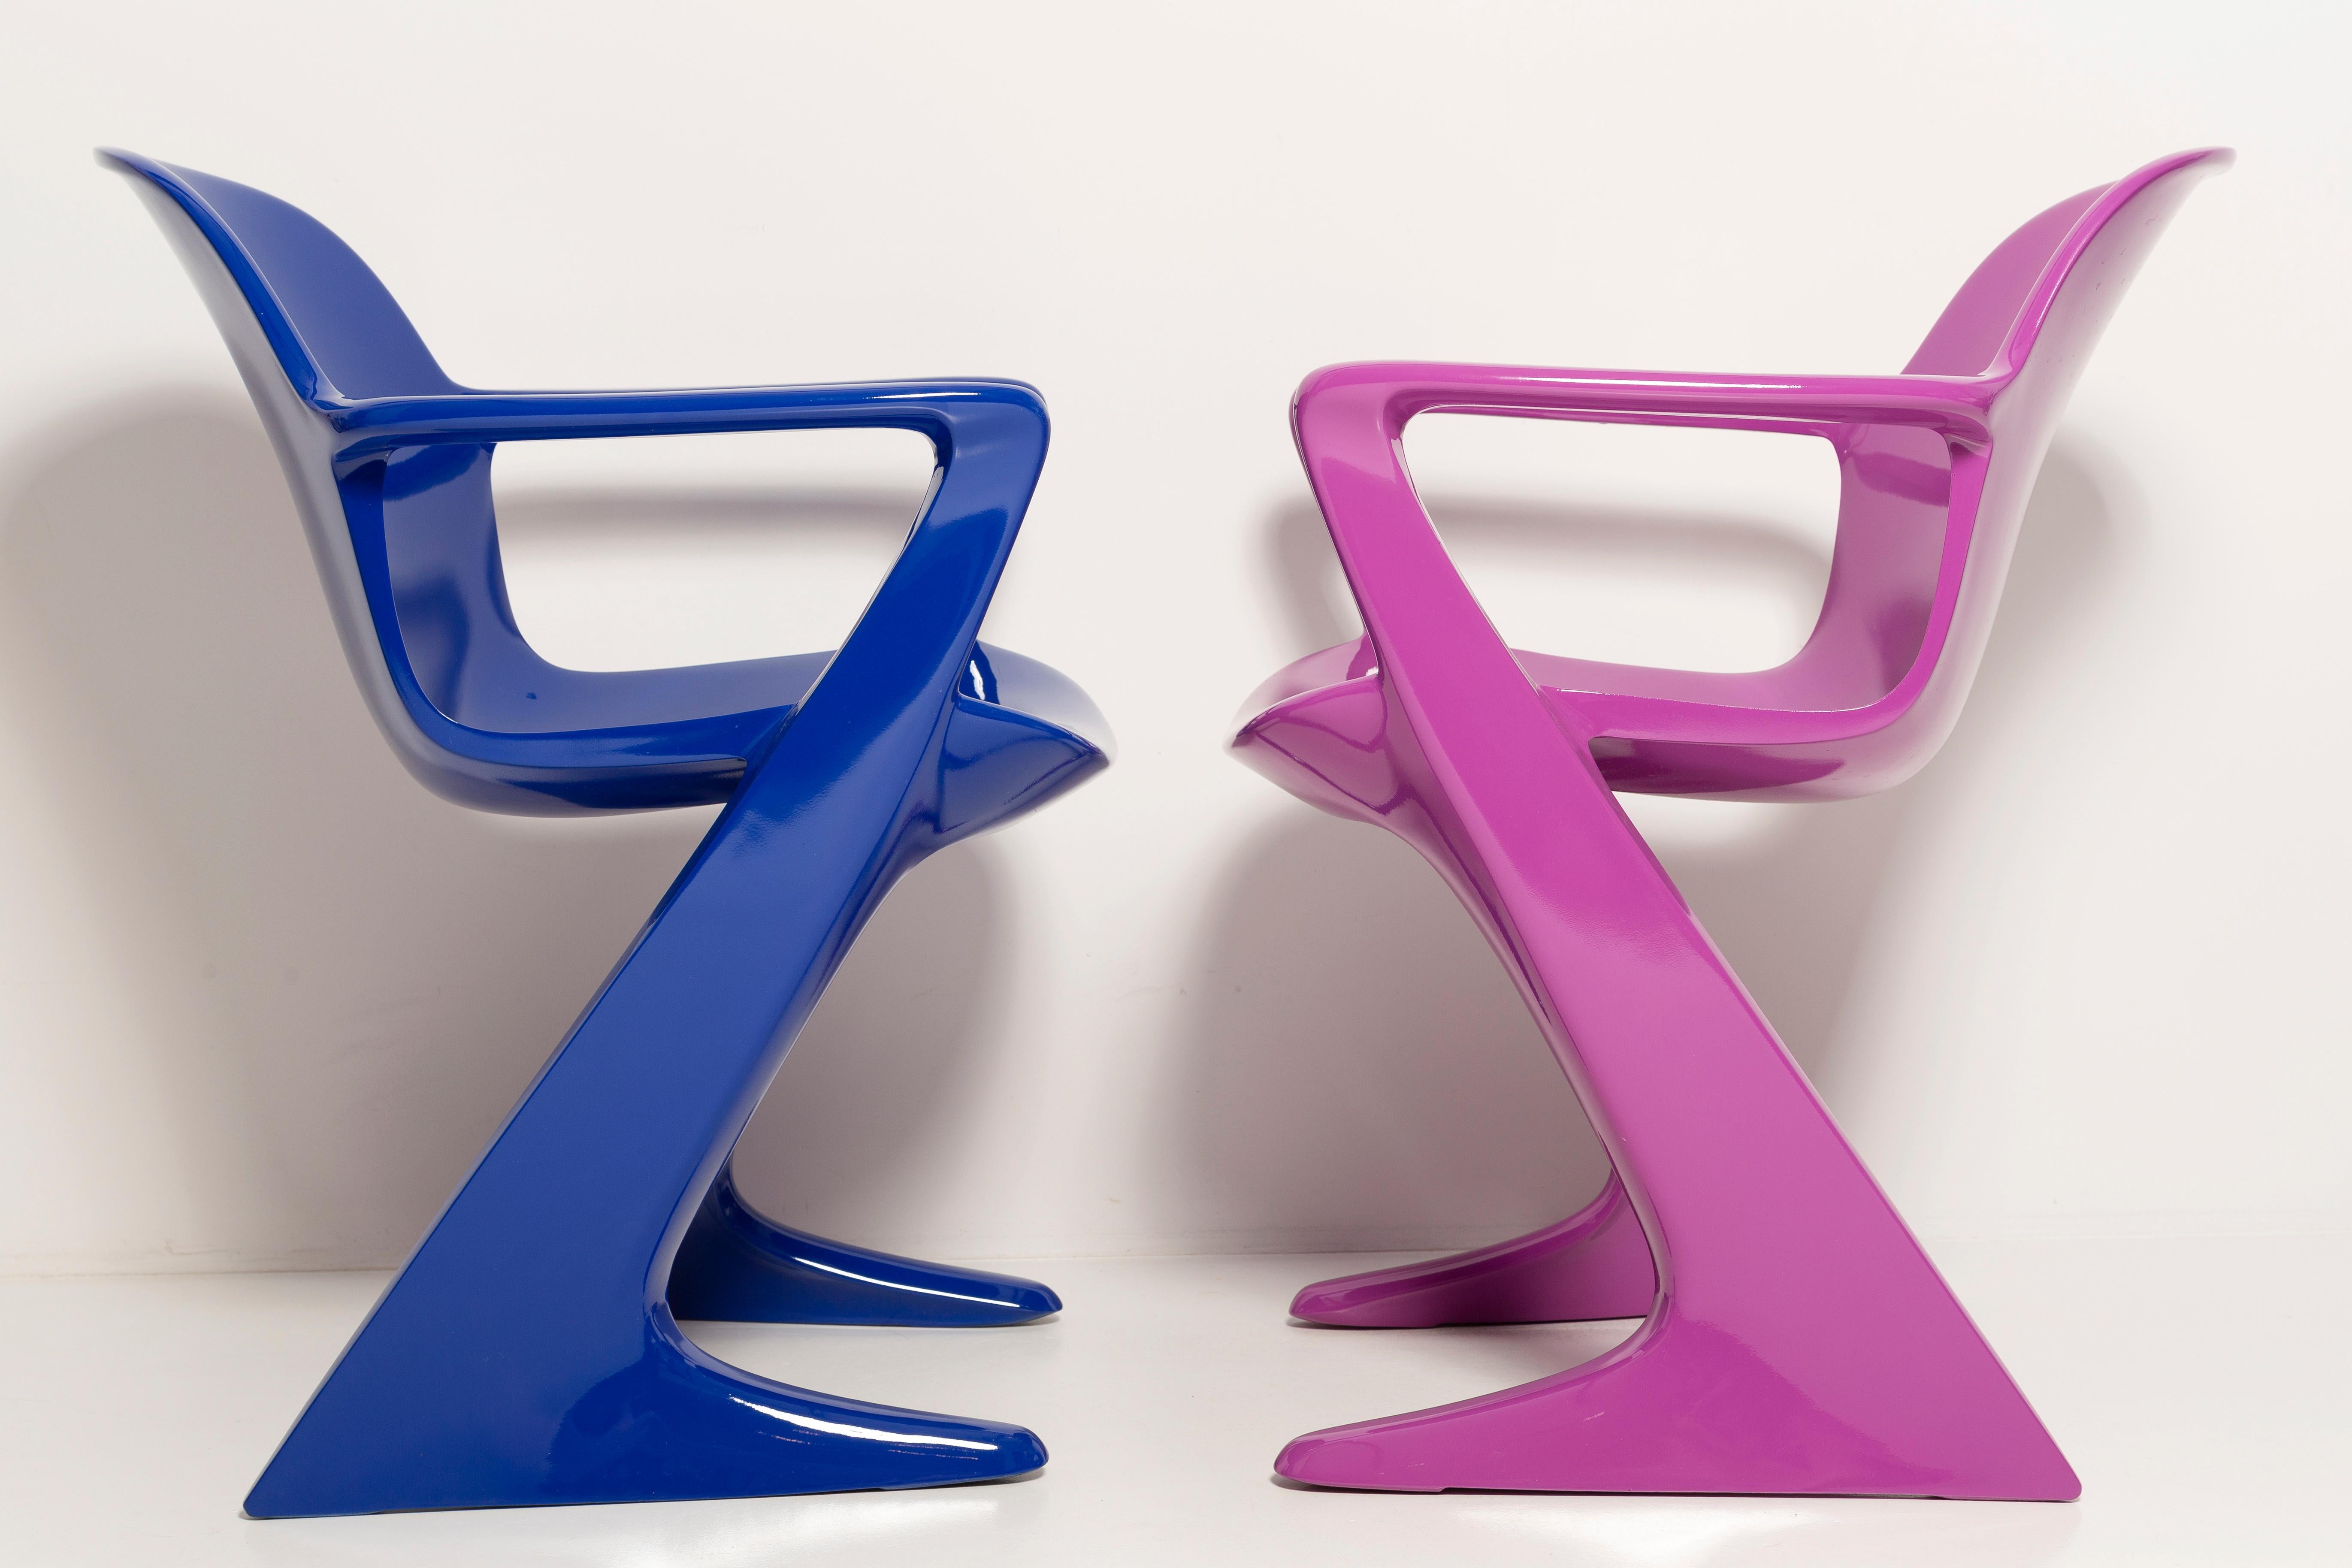 Two Mid-Century Purple and Blue Kangaroo Chairs, Ernst Moeckl, Germany, 1968 For Sale 1